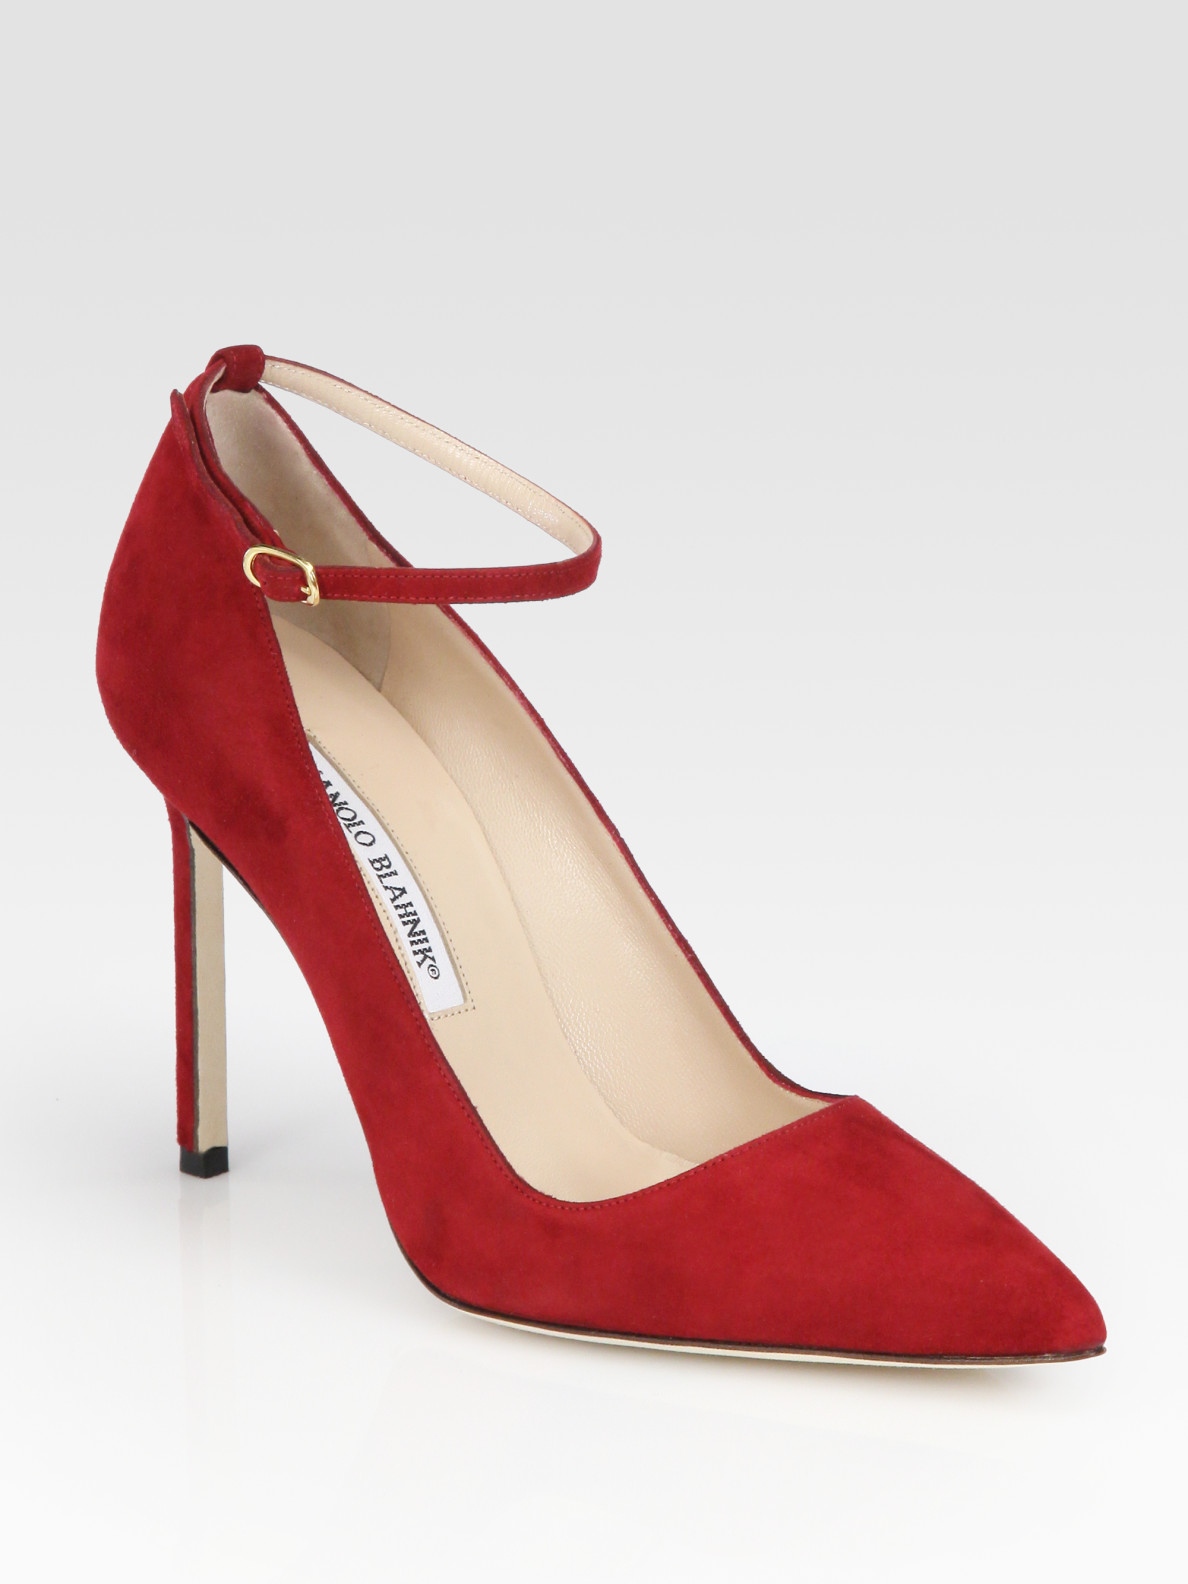 Manolo Blahnik Bb Suede Ankle Strap Pumps in Red - Lyst